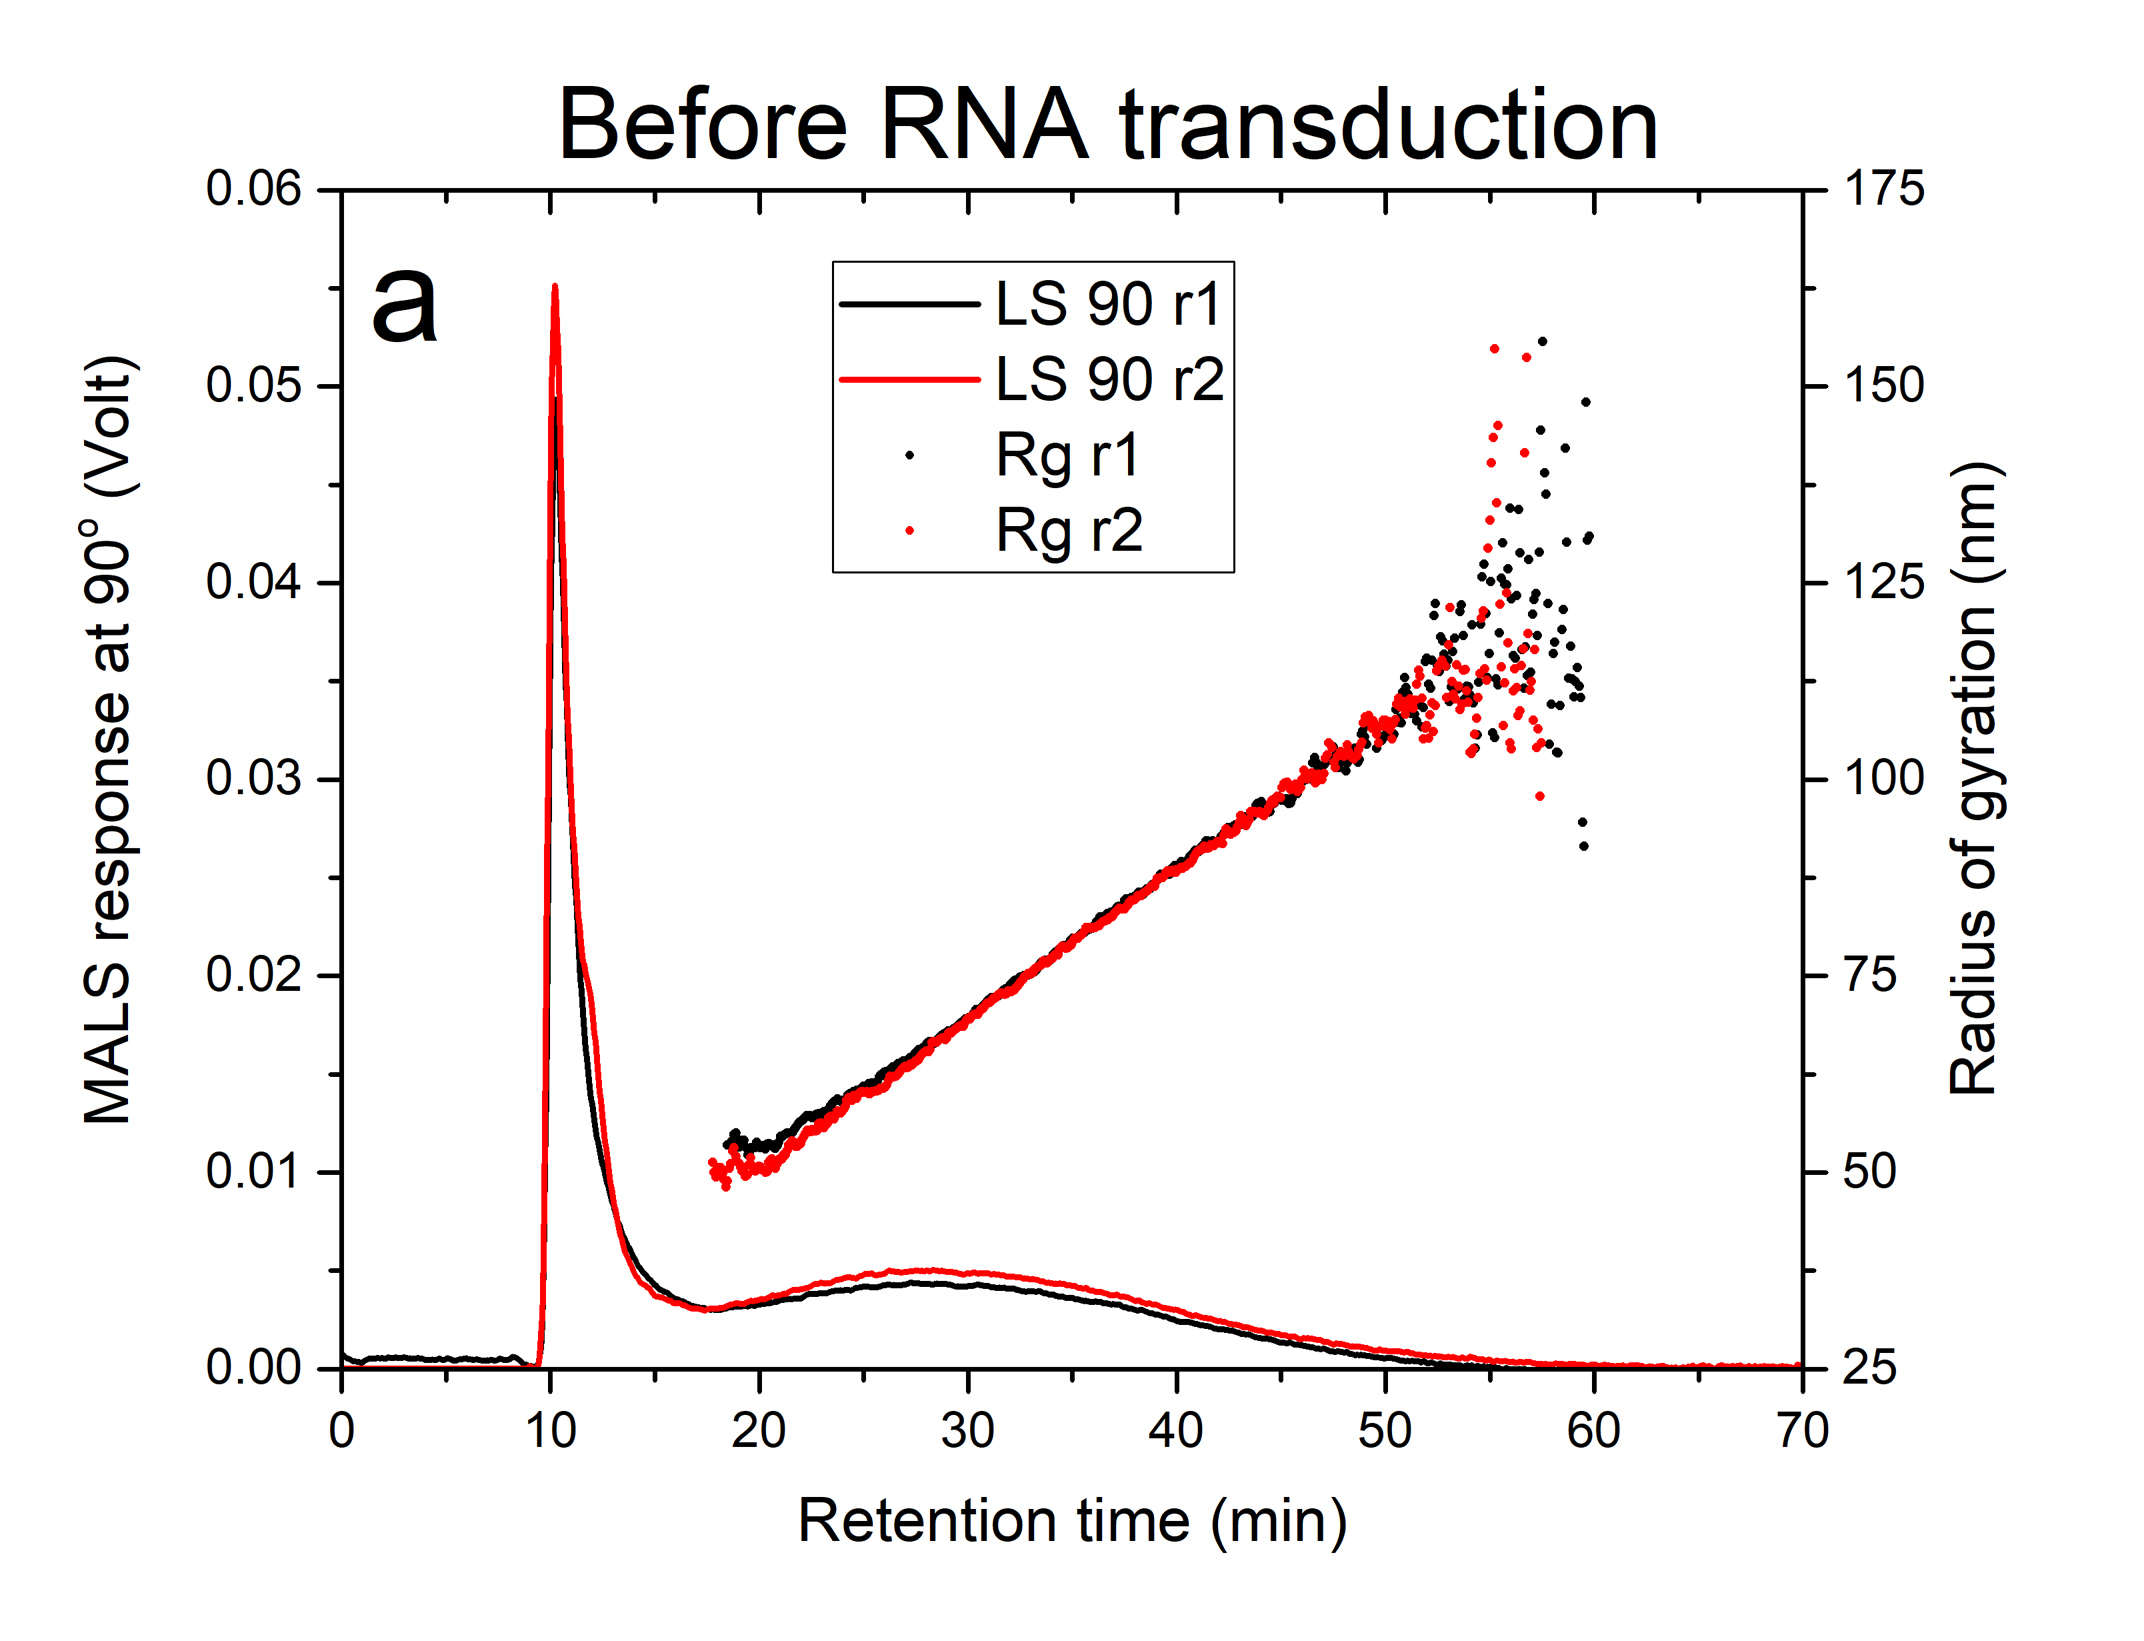 Figure 1. CF3-MALS fractograms and radius of gyration profi les of two replicates for the lentivirus product before (a) and after (b) RNA transduction. The solid lines represent the response of the MALS detector at 90°. The solid circles represent radius of gyration, Rg.